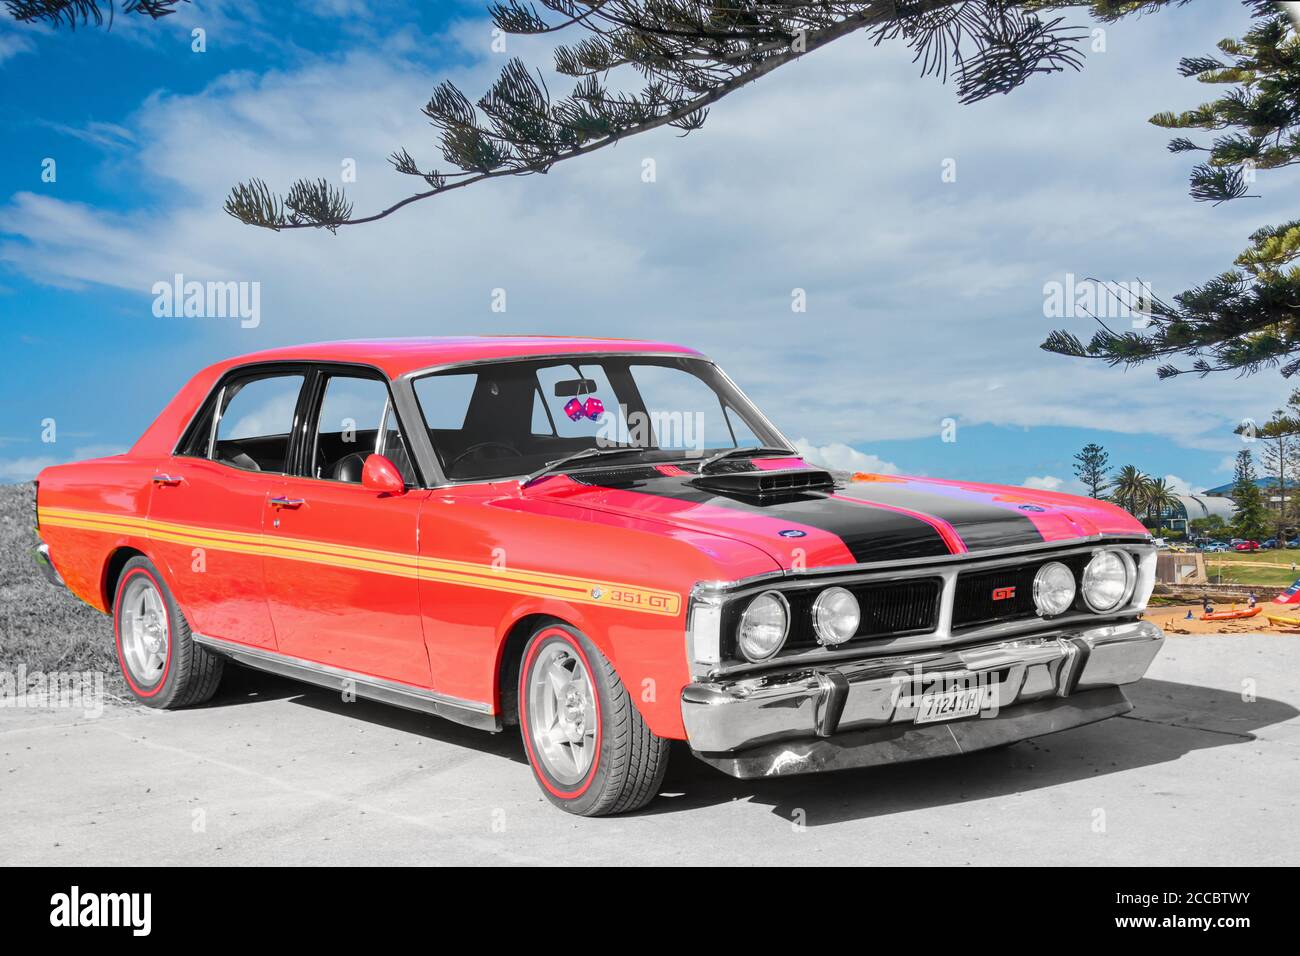 Ford Falcon 351-GT, a four door sports sedan built at Ford's Broadmeadows plant in Australia from 1970 to 1972. It had a 351 cubic inch Cleveland V8 Stock Photo